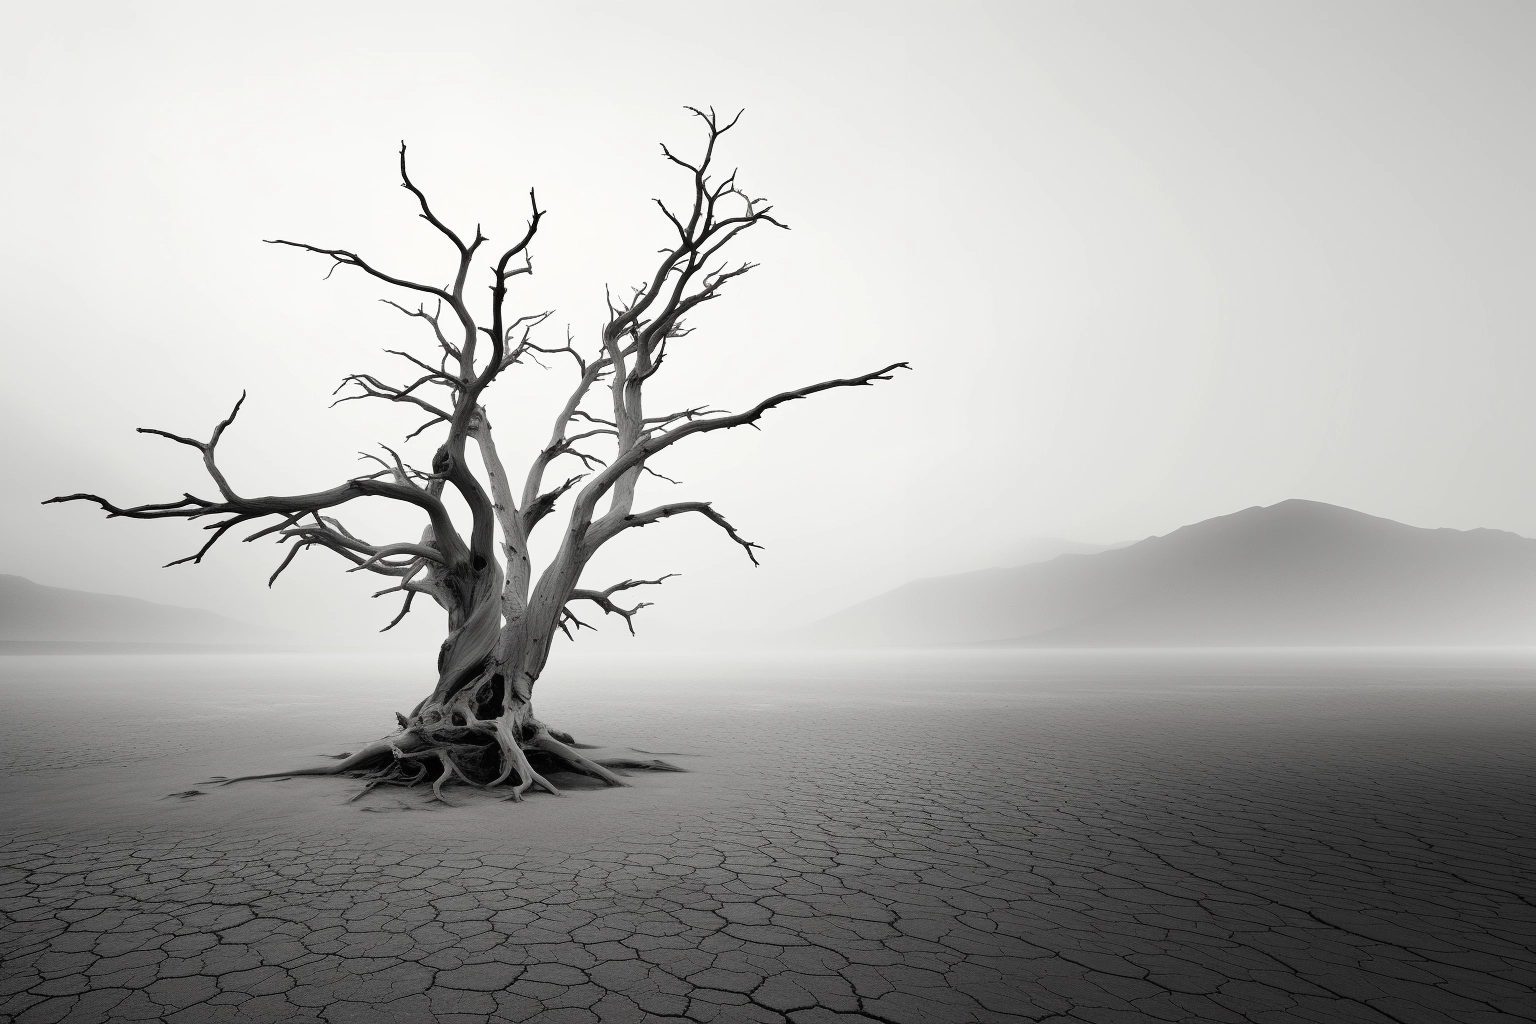 Image of a dry land